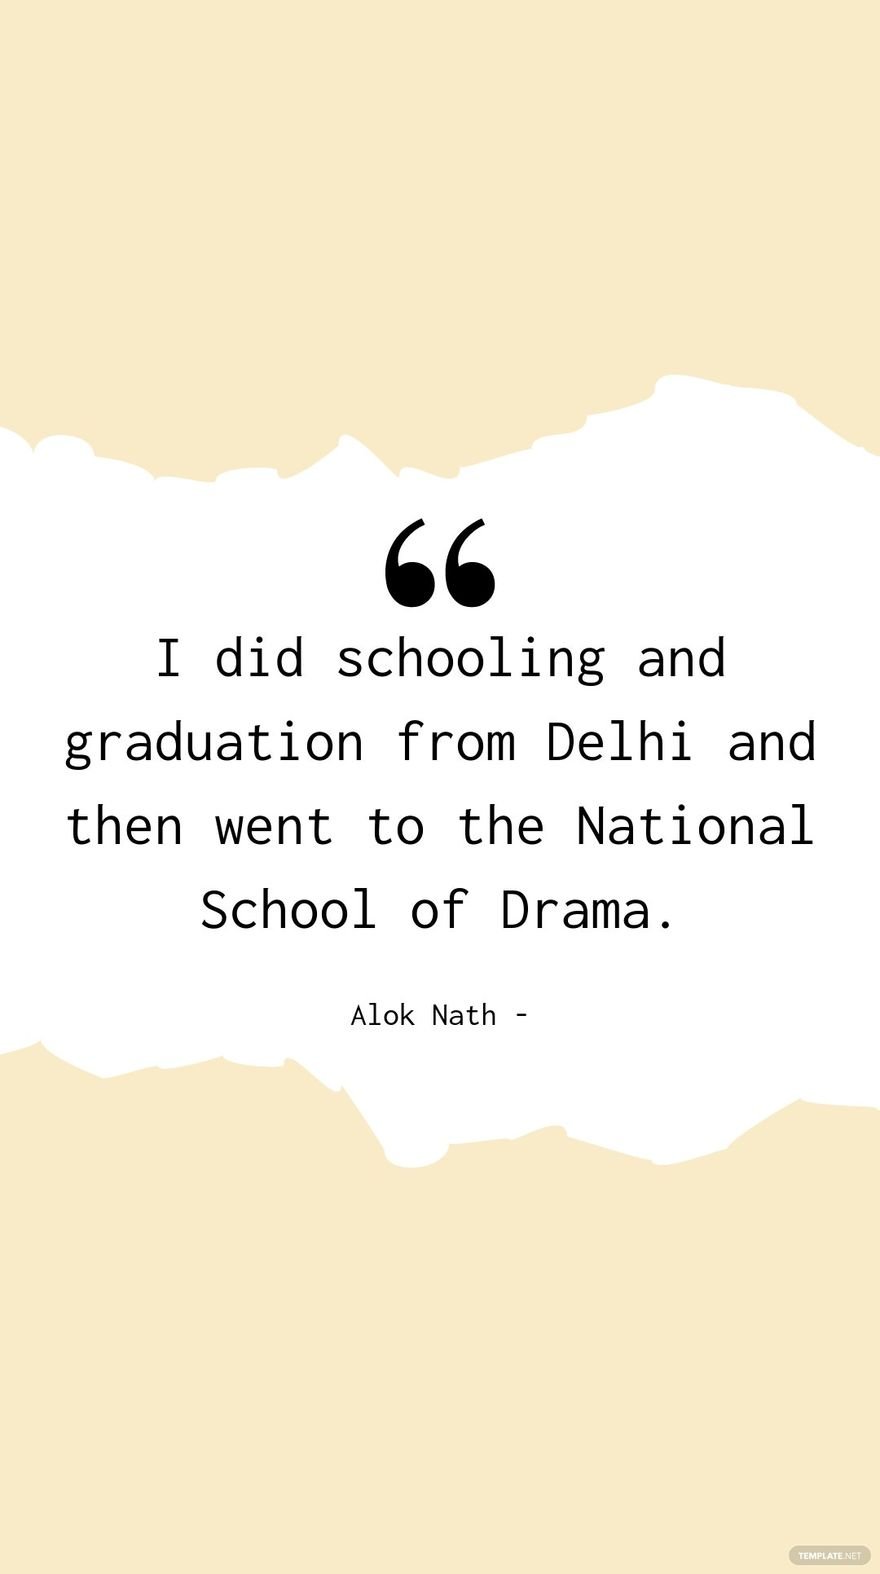 Alok Nath - I did schooling and graduation from Delhi and then went to the National School of Drama.